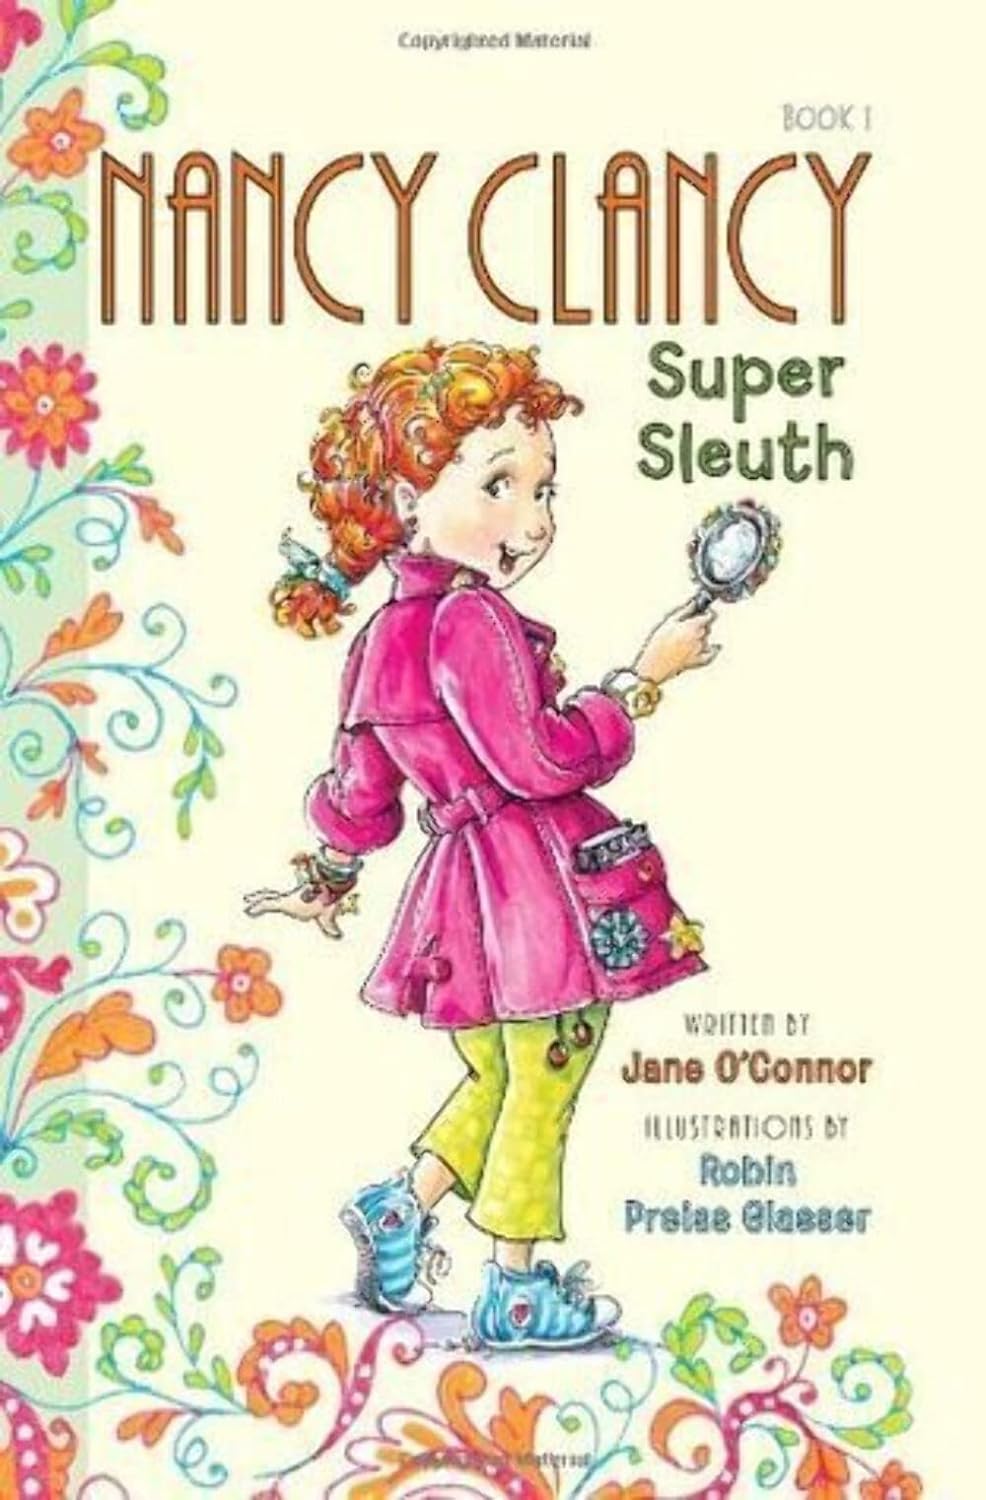 Cover of Nancy Clancy, Super Sleuth by Jane O'Connor, illustrated by Robin Preiss Glasser